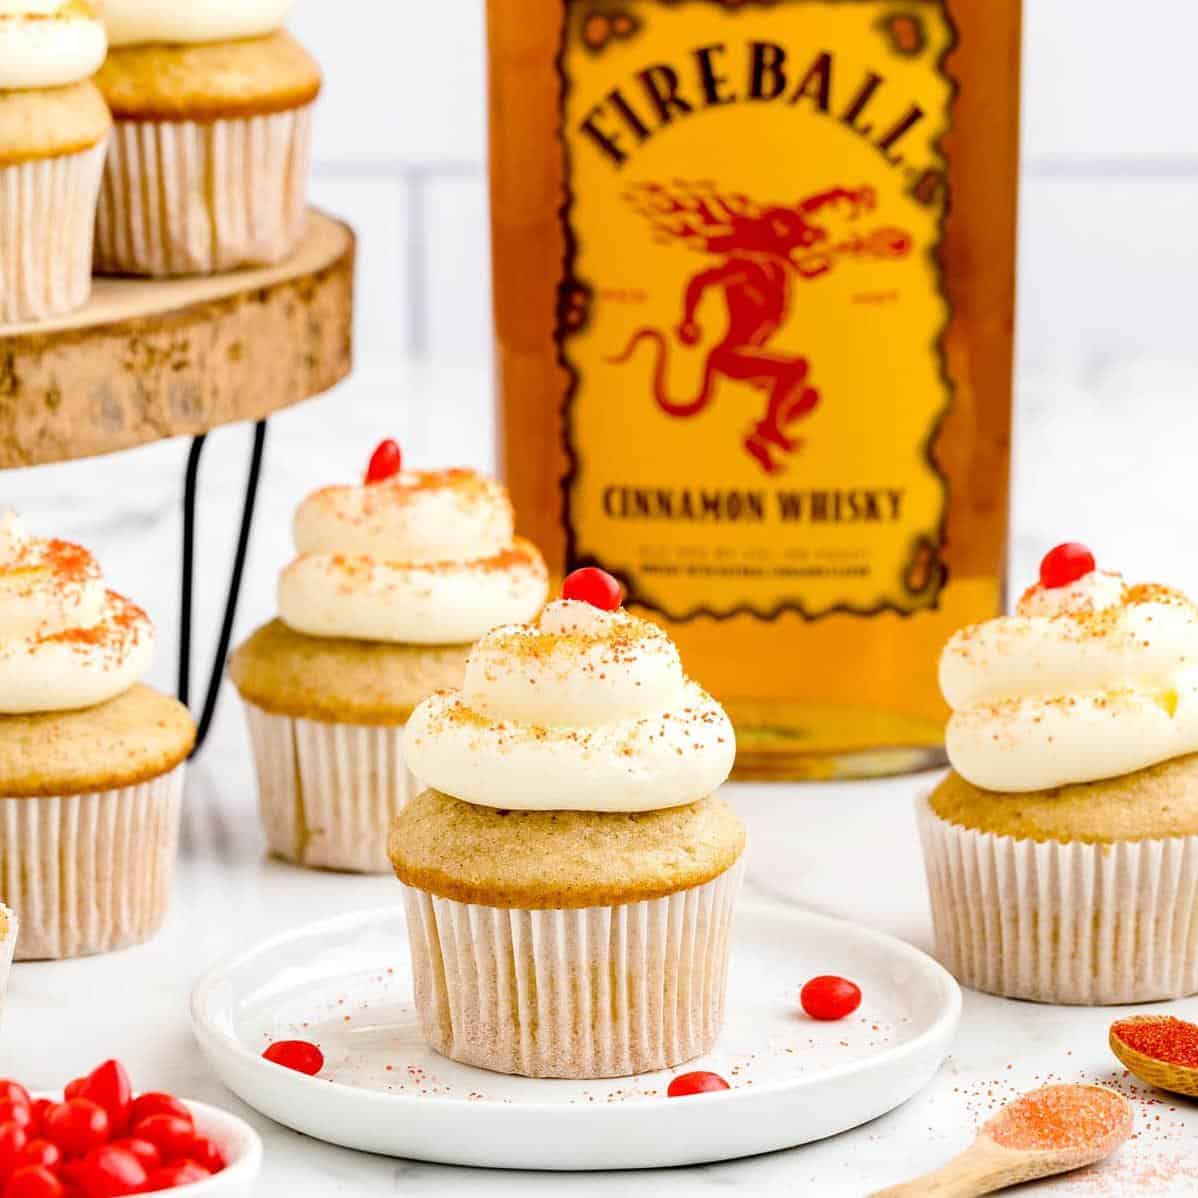  Wake up your taste buds with a little Fireball!